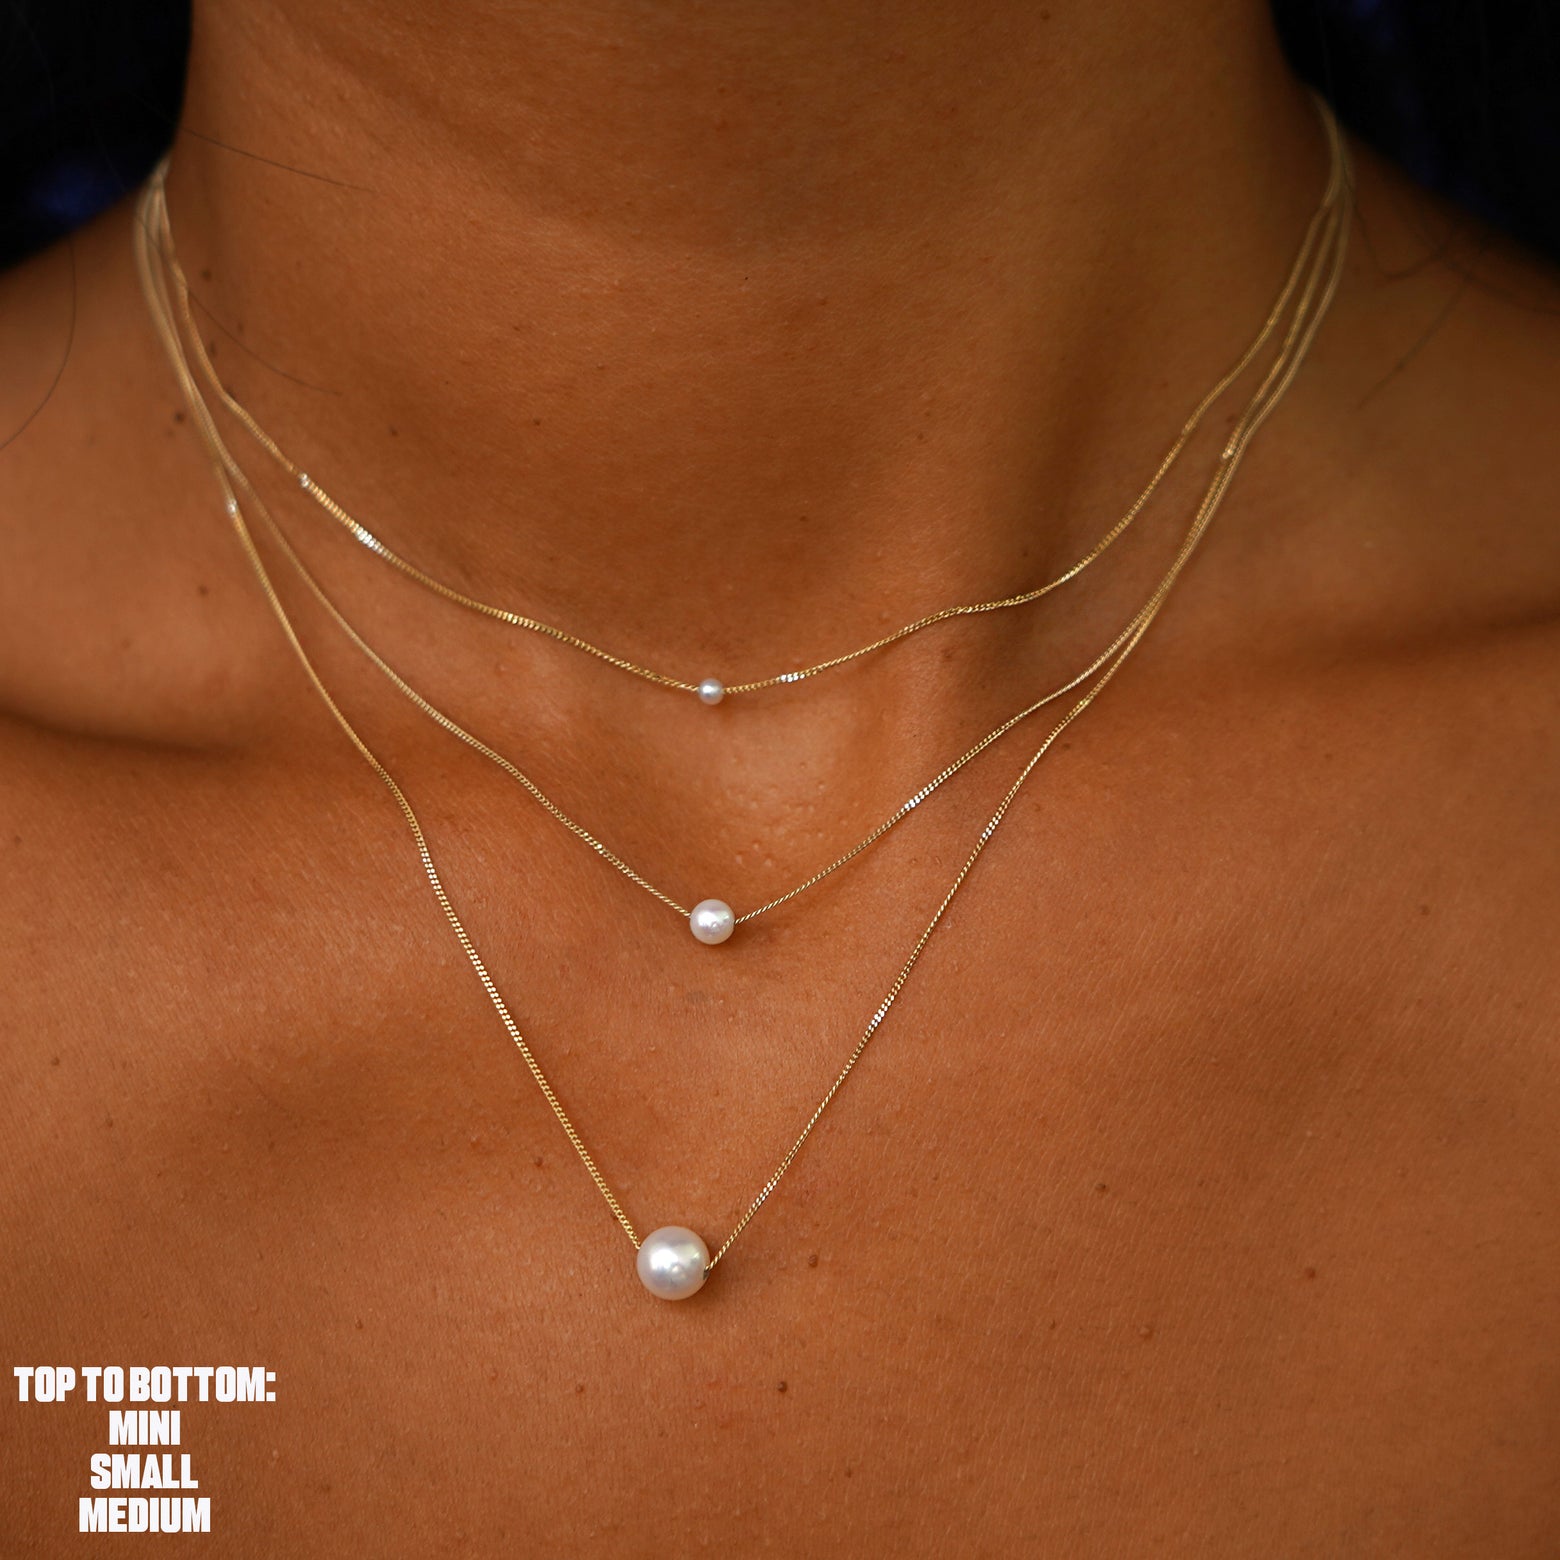 A model wearing all three sizes of the Pearl Slide Necklace layered from smallest to largest pearl